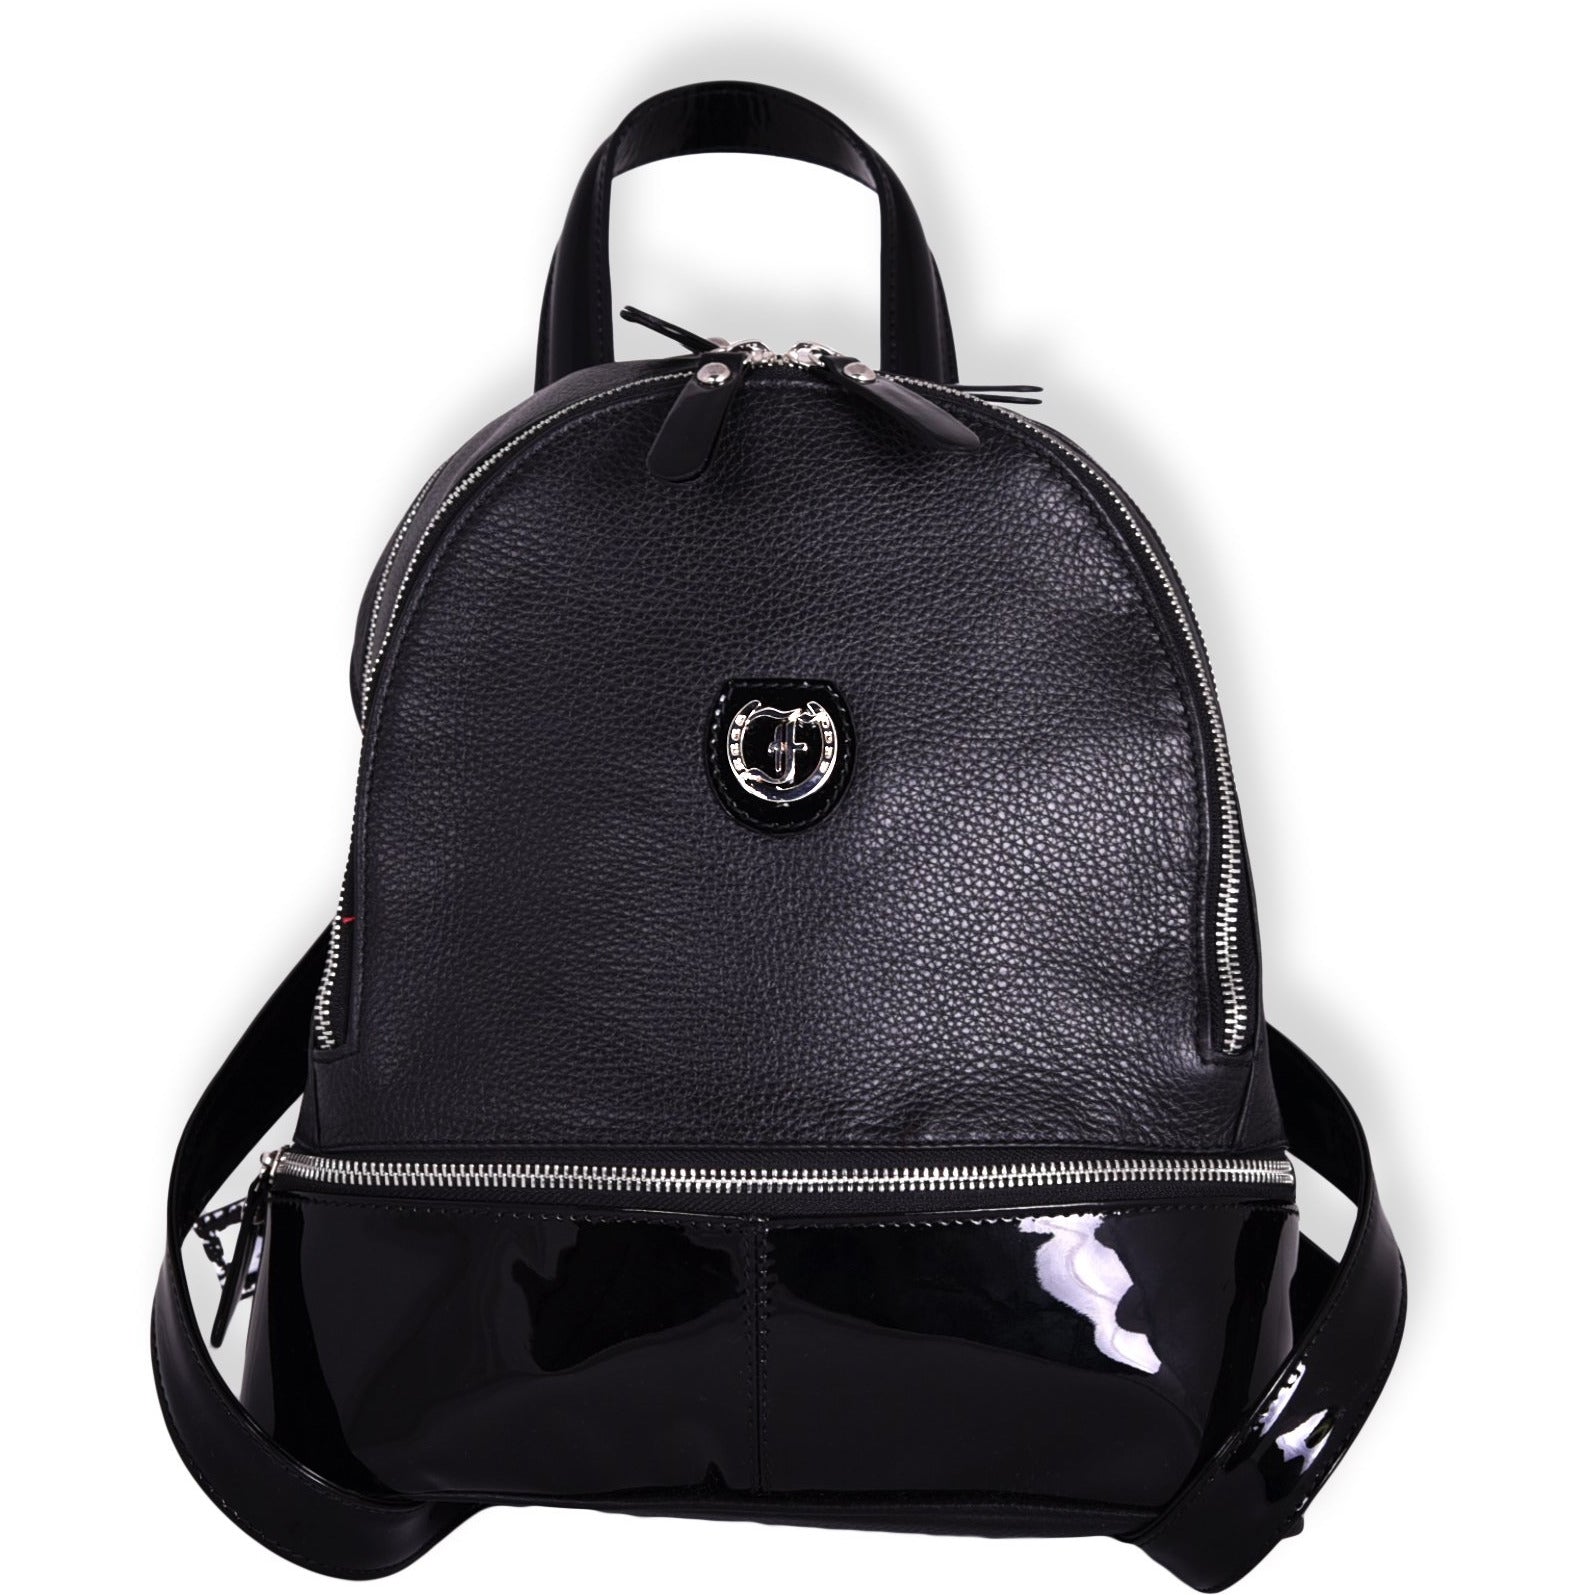 Brougham Backpack